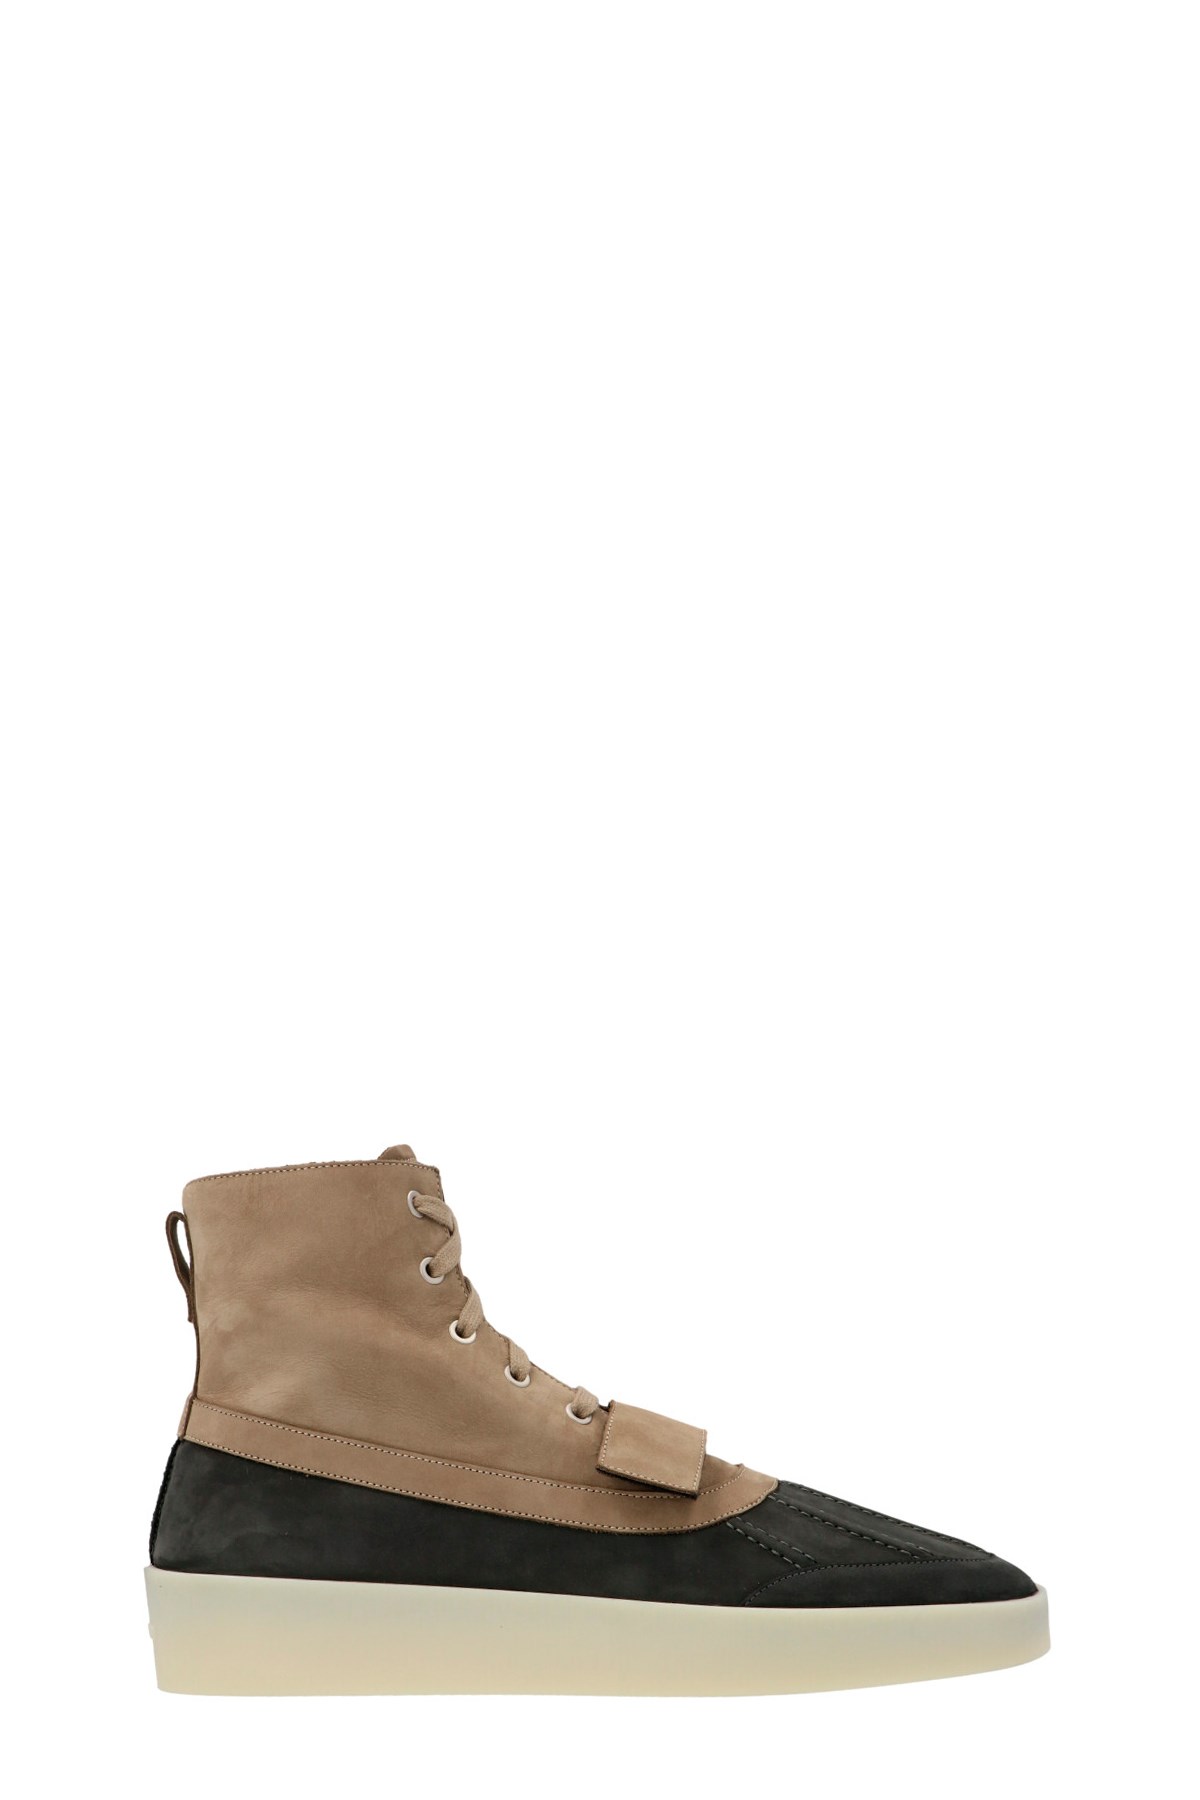 FEAR OF GOD 'Duck Boot’ Sneakers